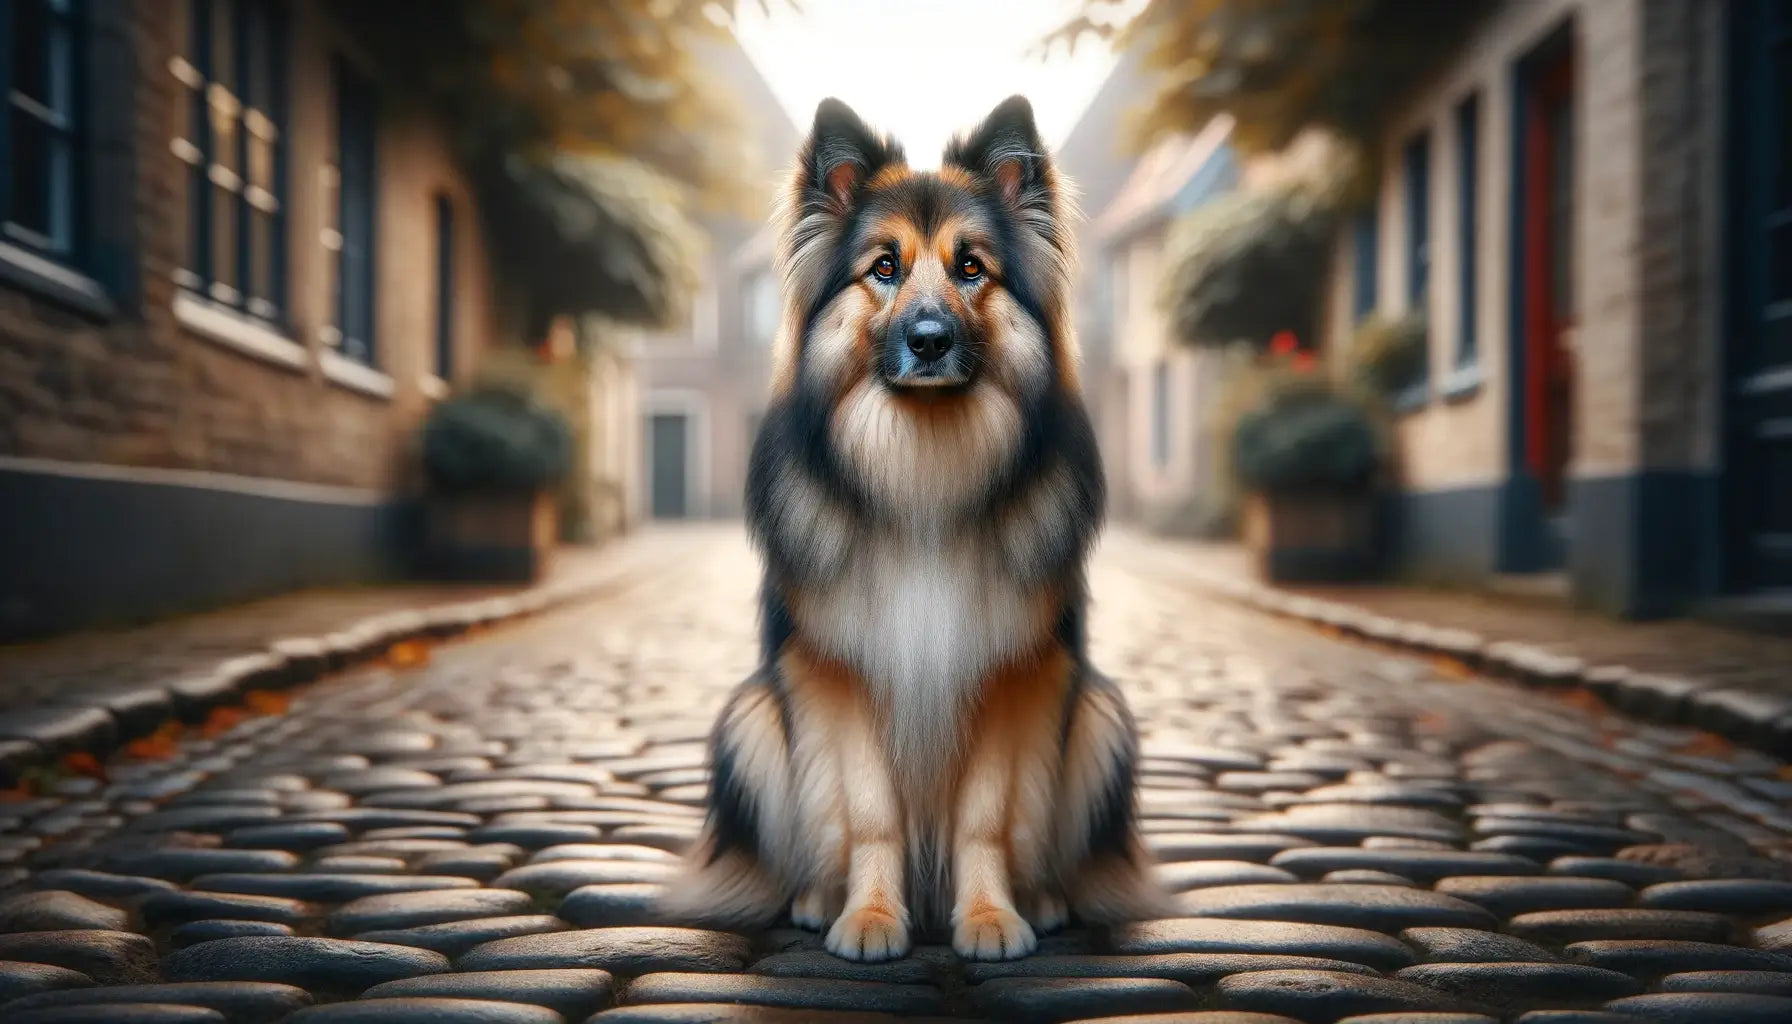 A Shiloh Shepherd on a cobblestone path displaying the breed's approachable attitude and watchful eyes.